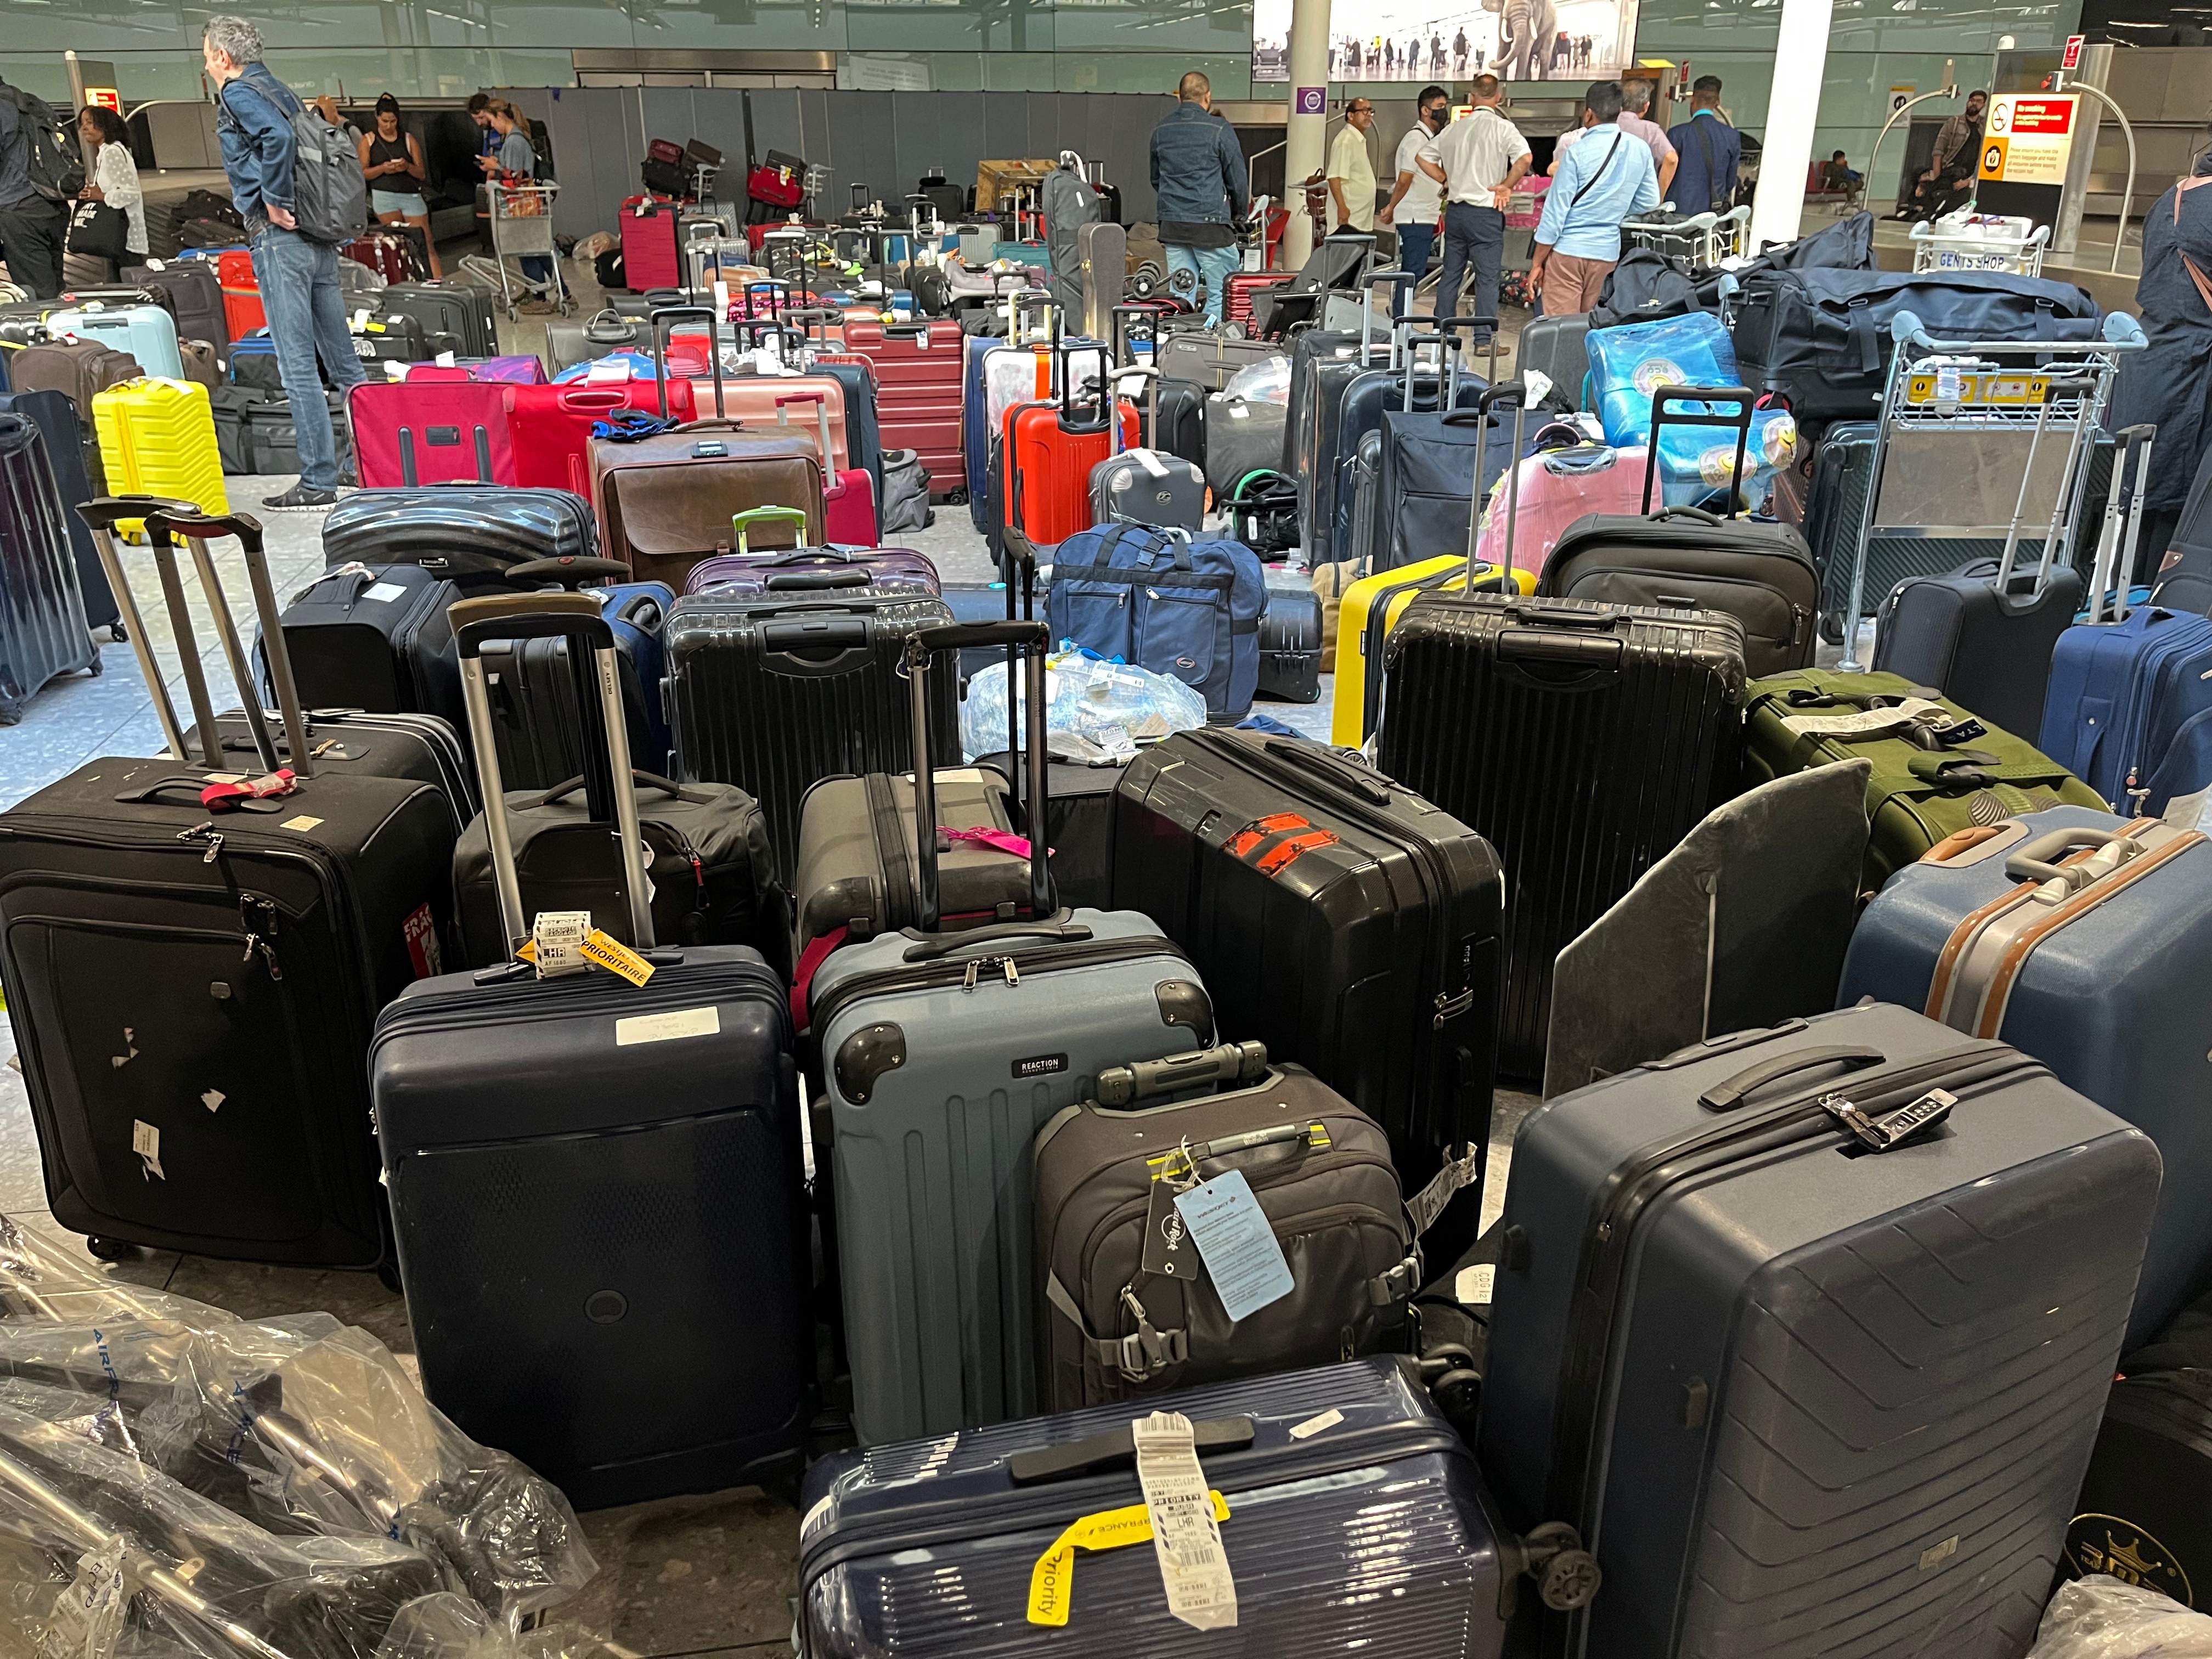 Suitcases go uncollected at Heathrow's Terminal Three